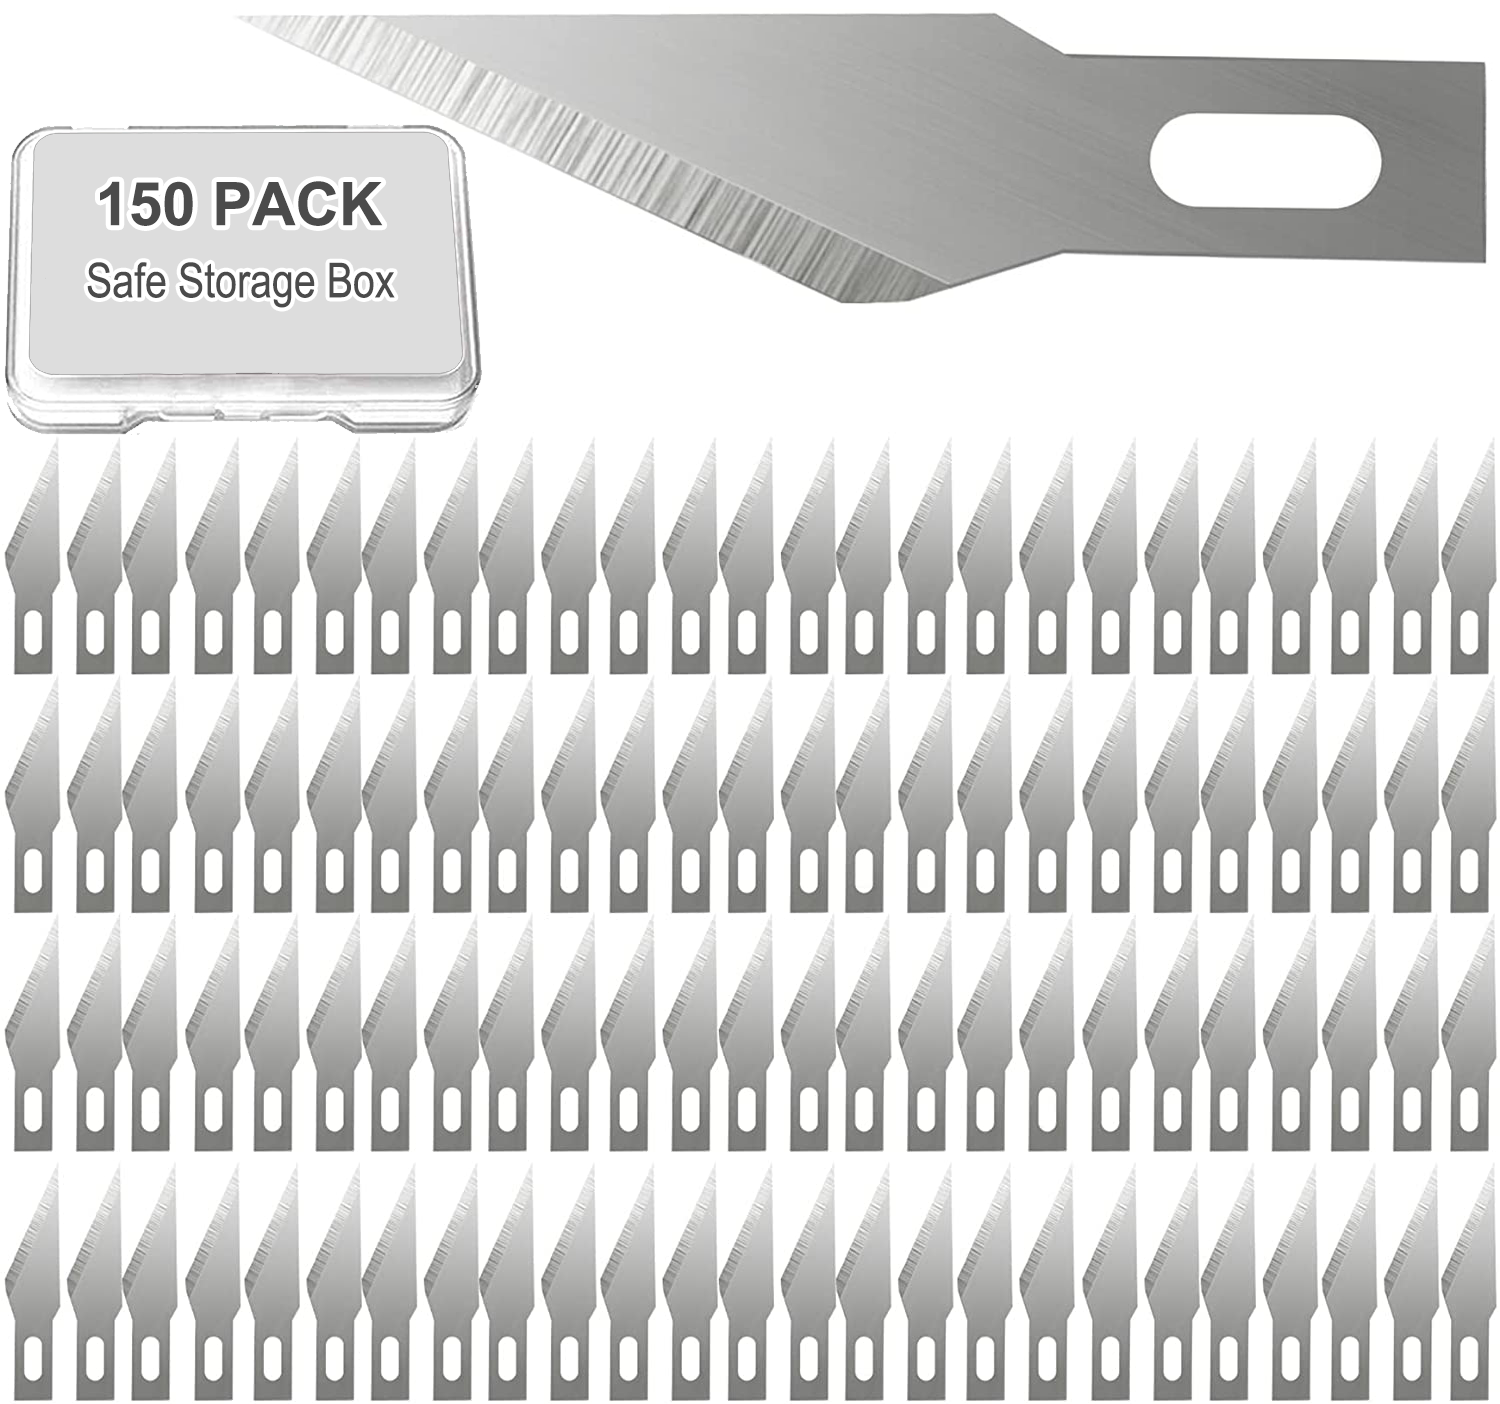 Yapicoco Hobby Knife Exacto Blades #11, 150 PCS SK-5 Carbon Steel Super  Sharp Craft Cutting Tool with Storage Case for Art, Scrapbooking, Cutting